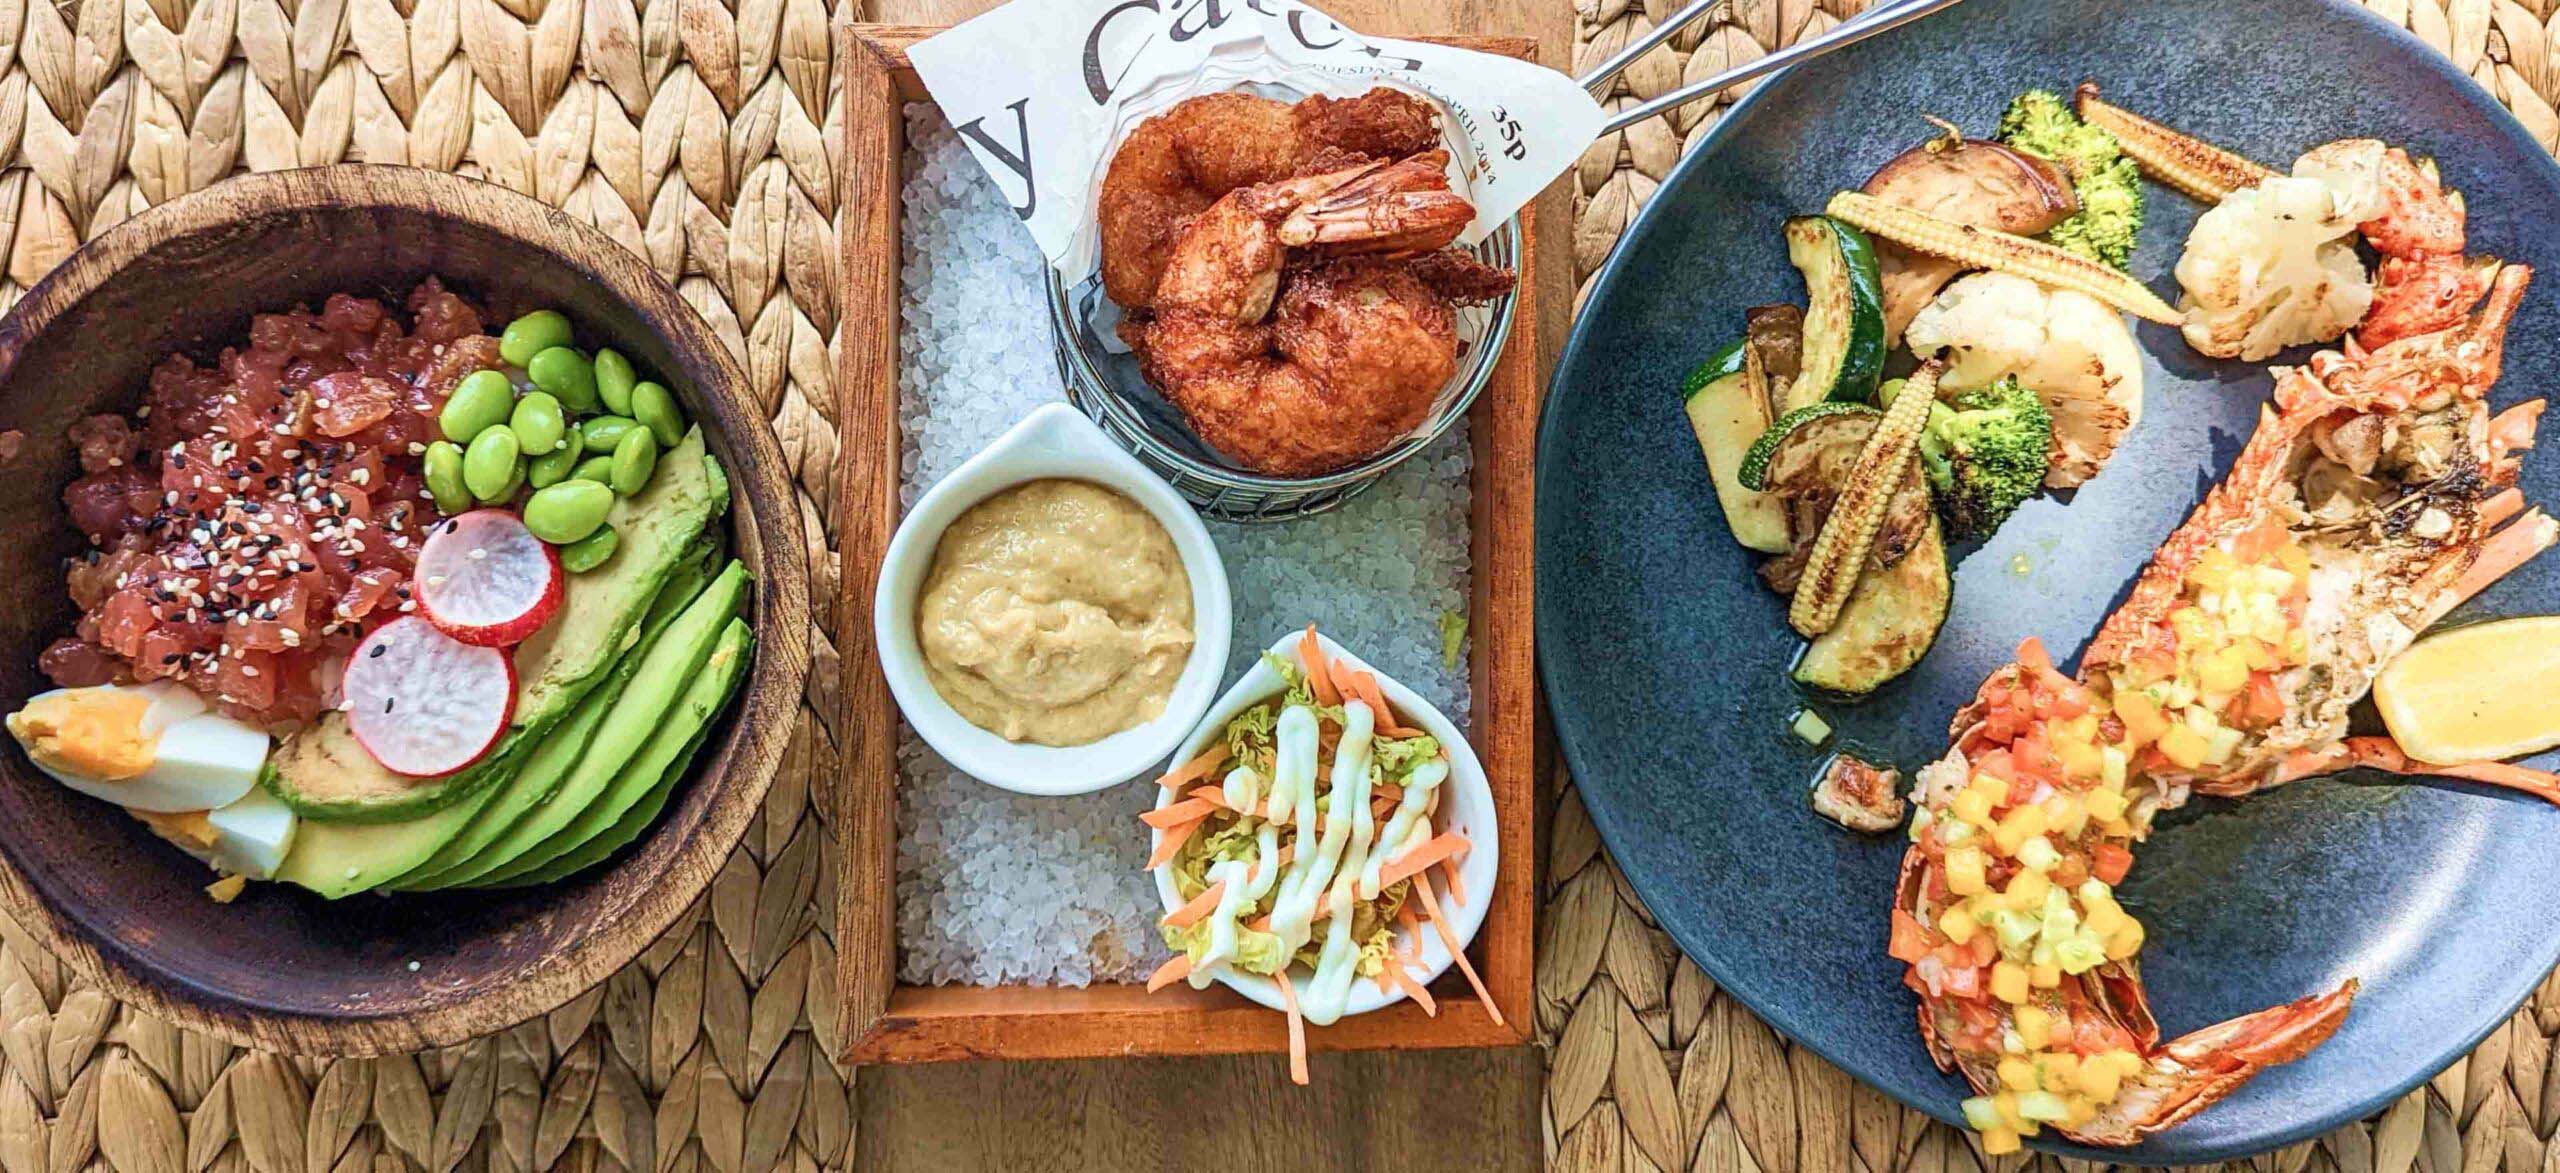 Traditional Maldivian cuisine at the Emperor Beach Club, with the Poke Bowl and Half-tail Reef Lobster.